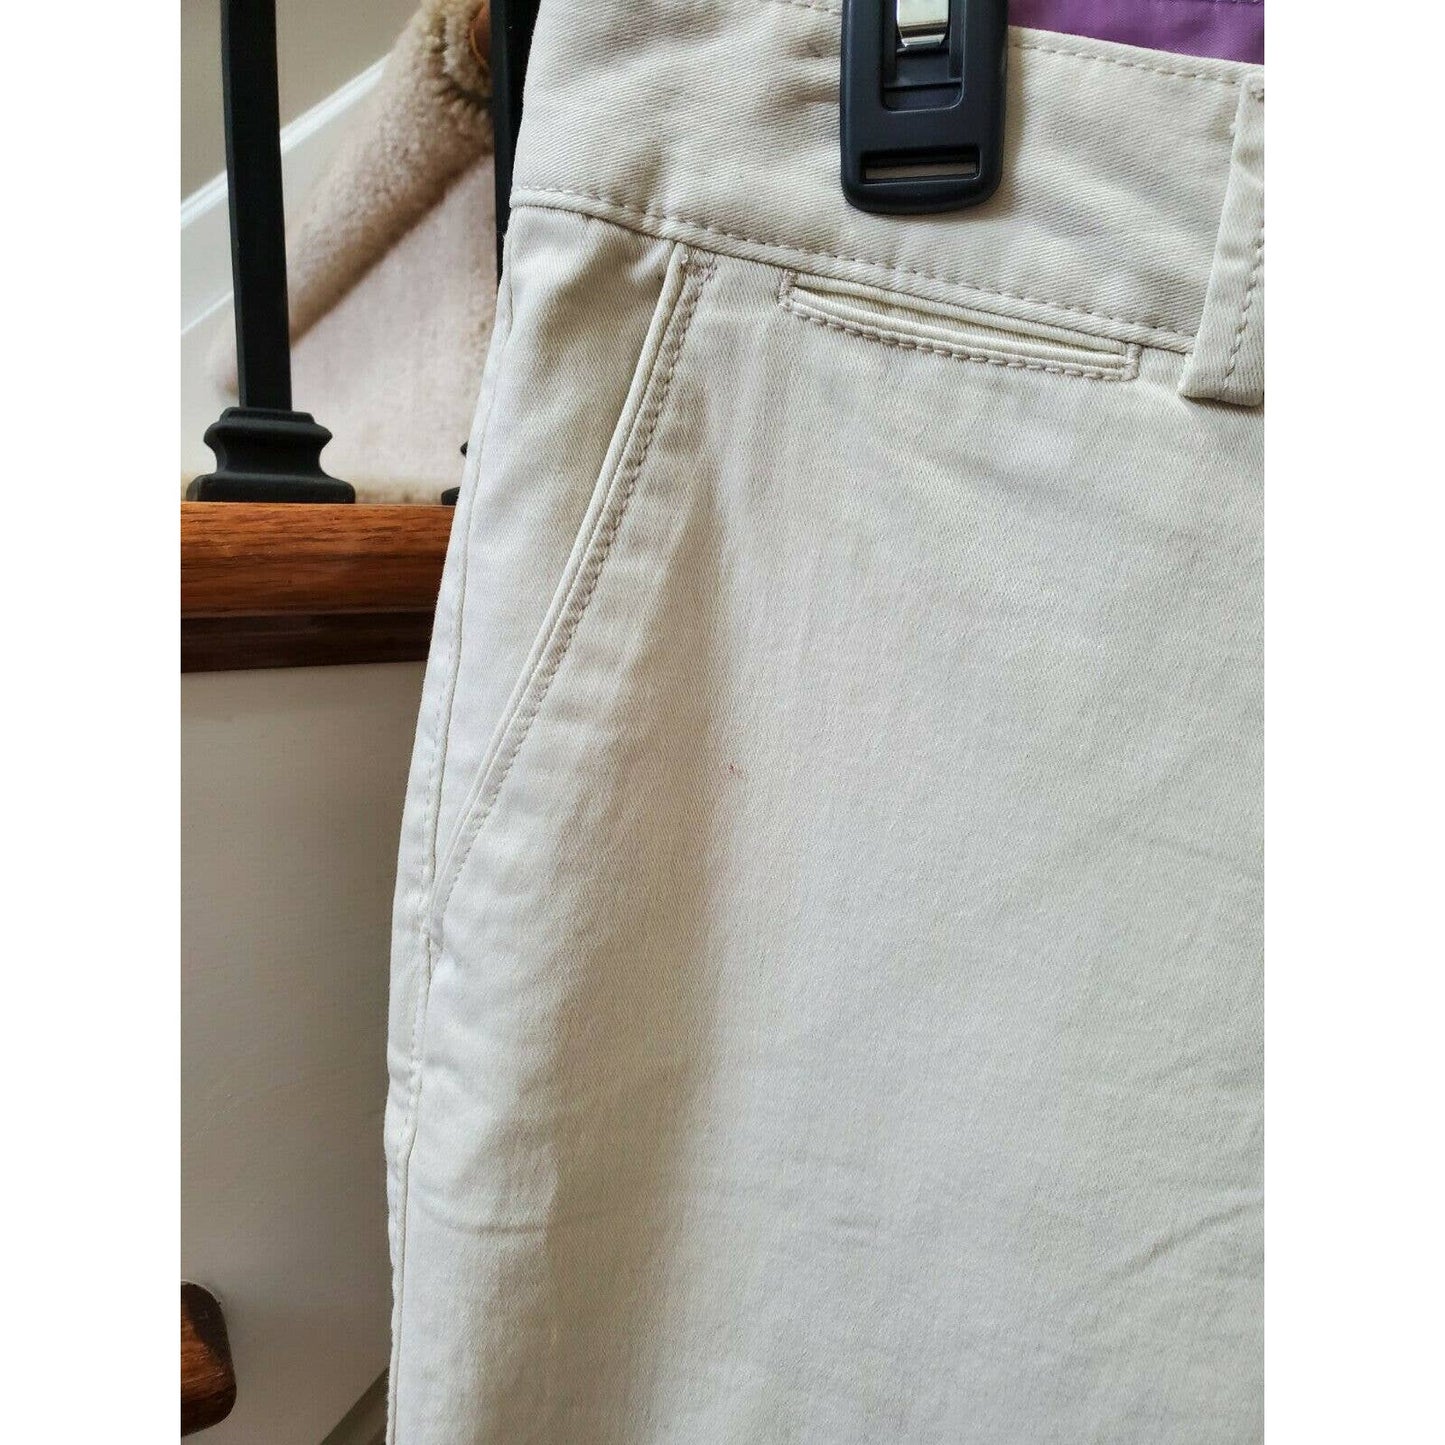 Dockers Women's White Cotton Mid Rise Straight Legs Casual Jeans Pants Size 12